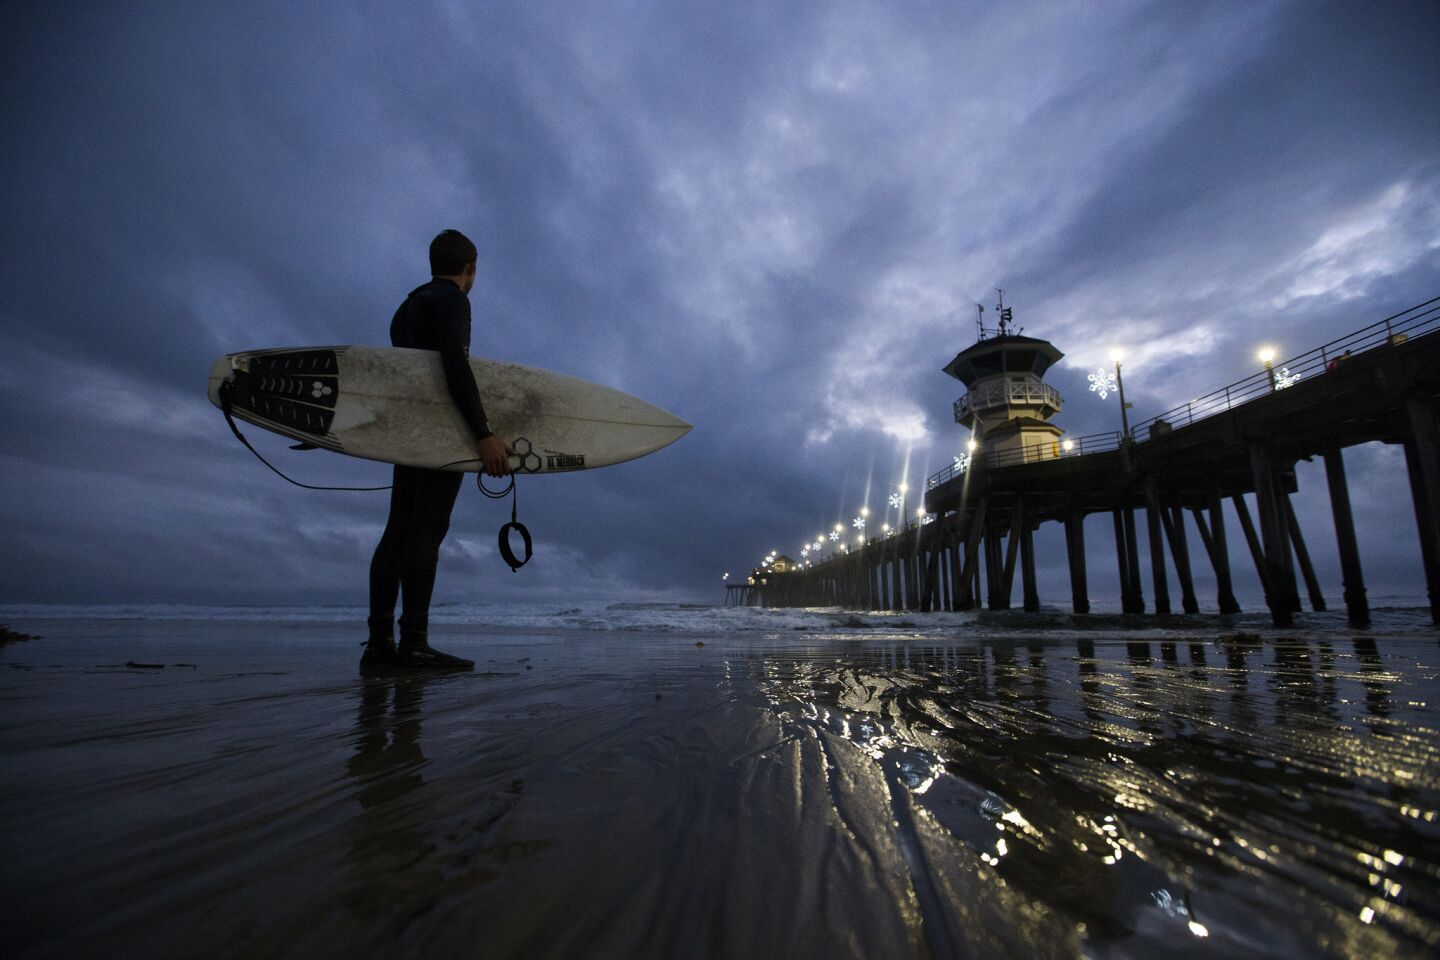 Surfer and Huntington Beach lifeguard Jachin Hamborg watches the dramatic sky and waves after surfing following his lifeguarding shift at dusk at the Huntington Beach pier.